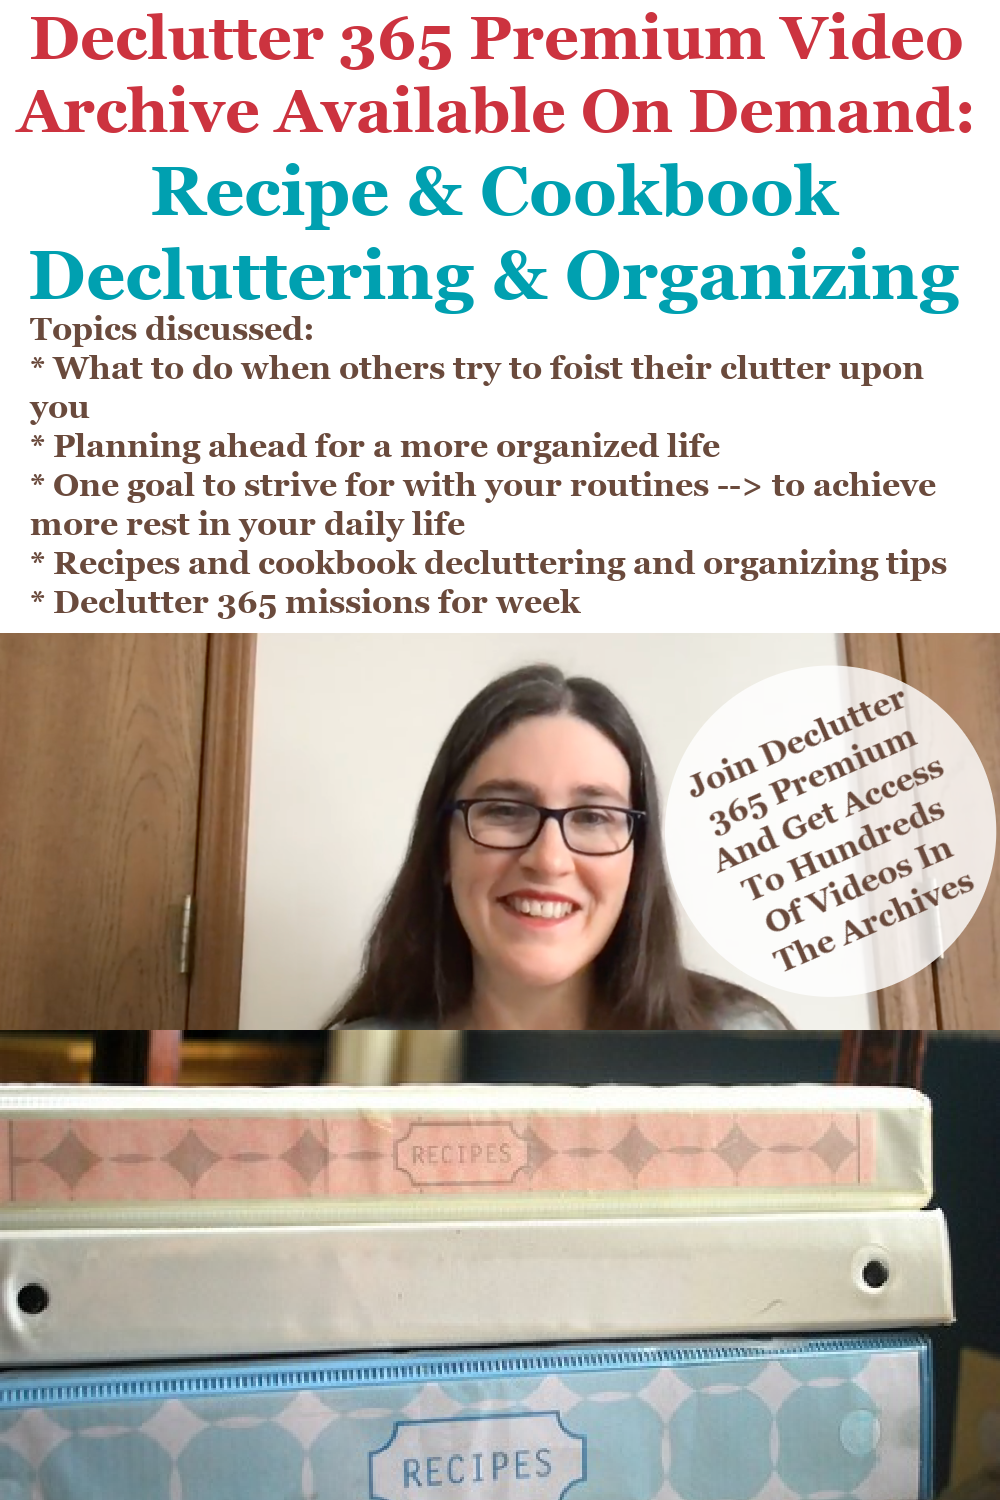 Declutter 365 Premium video archive available on demand all about decluttering and organizing your recipes and cookbooks, on Home Storage Solutions 101